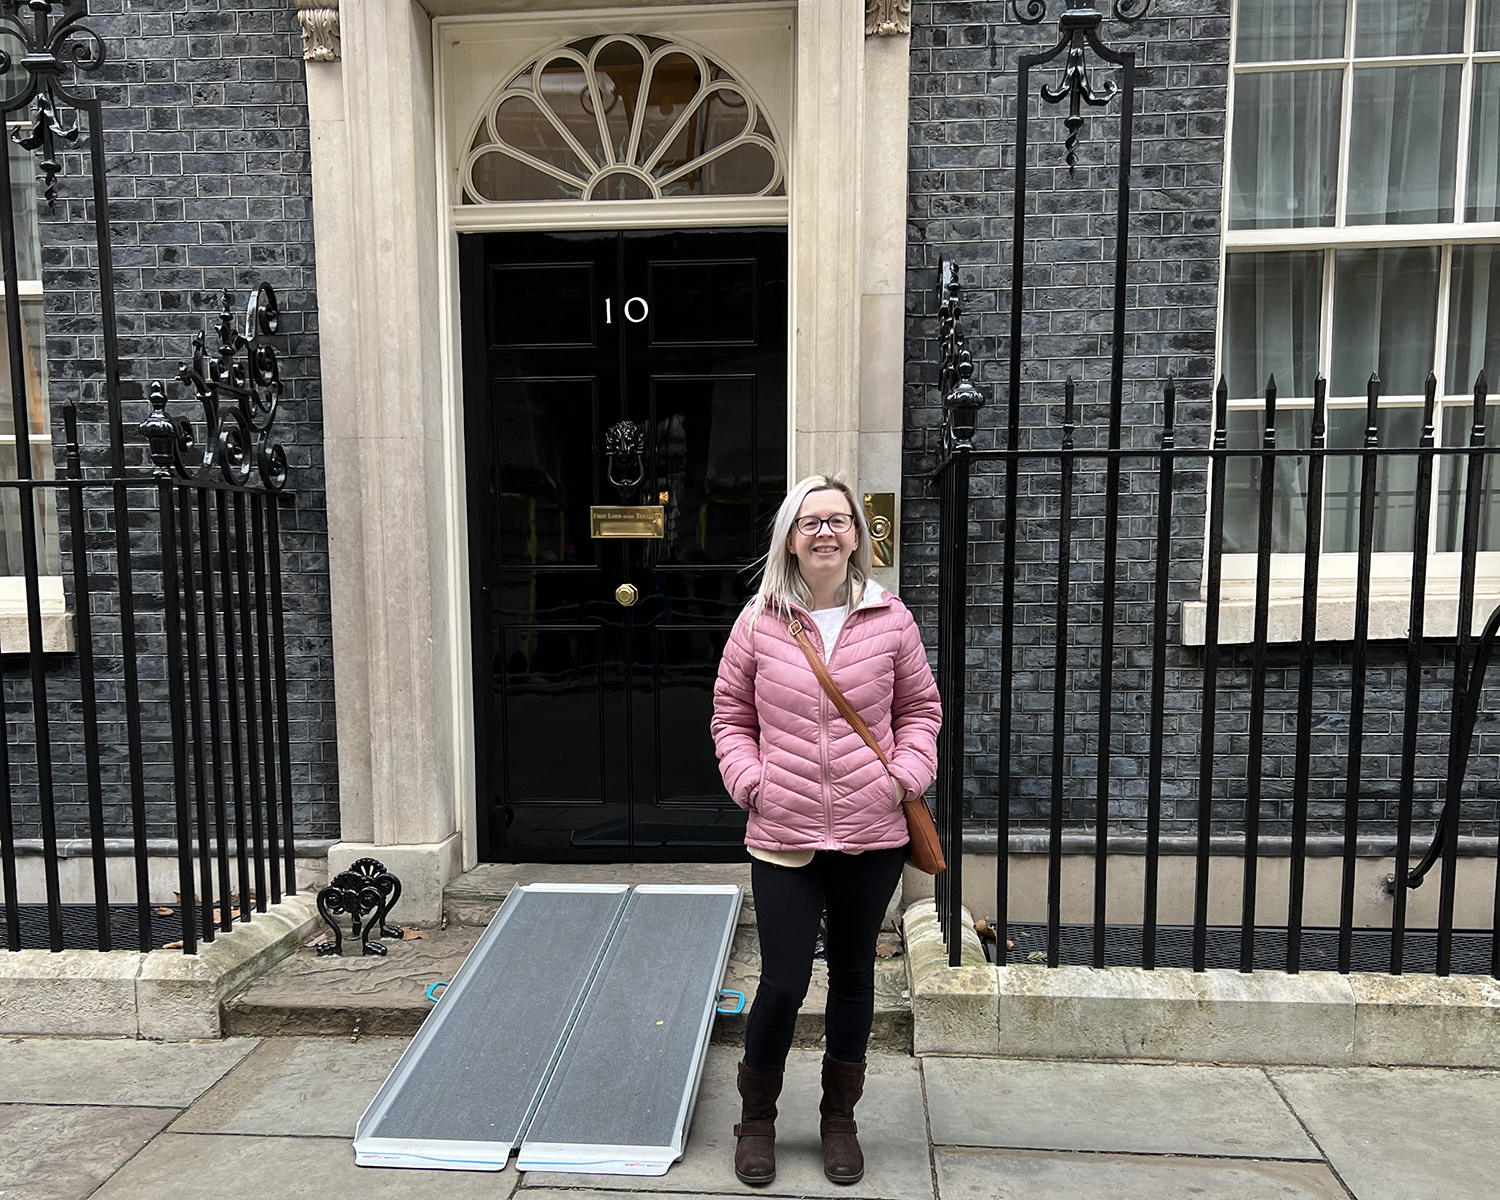 Hayley before her meeting outside 10 Downing Street